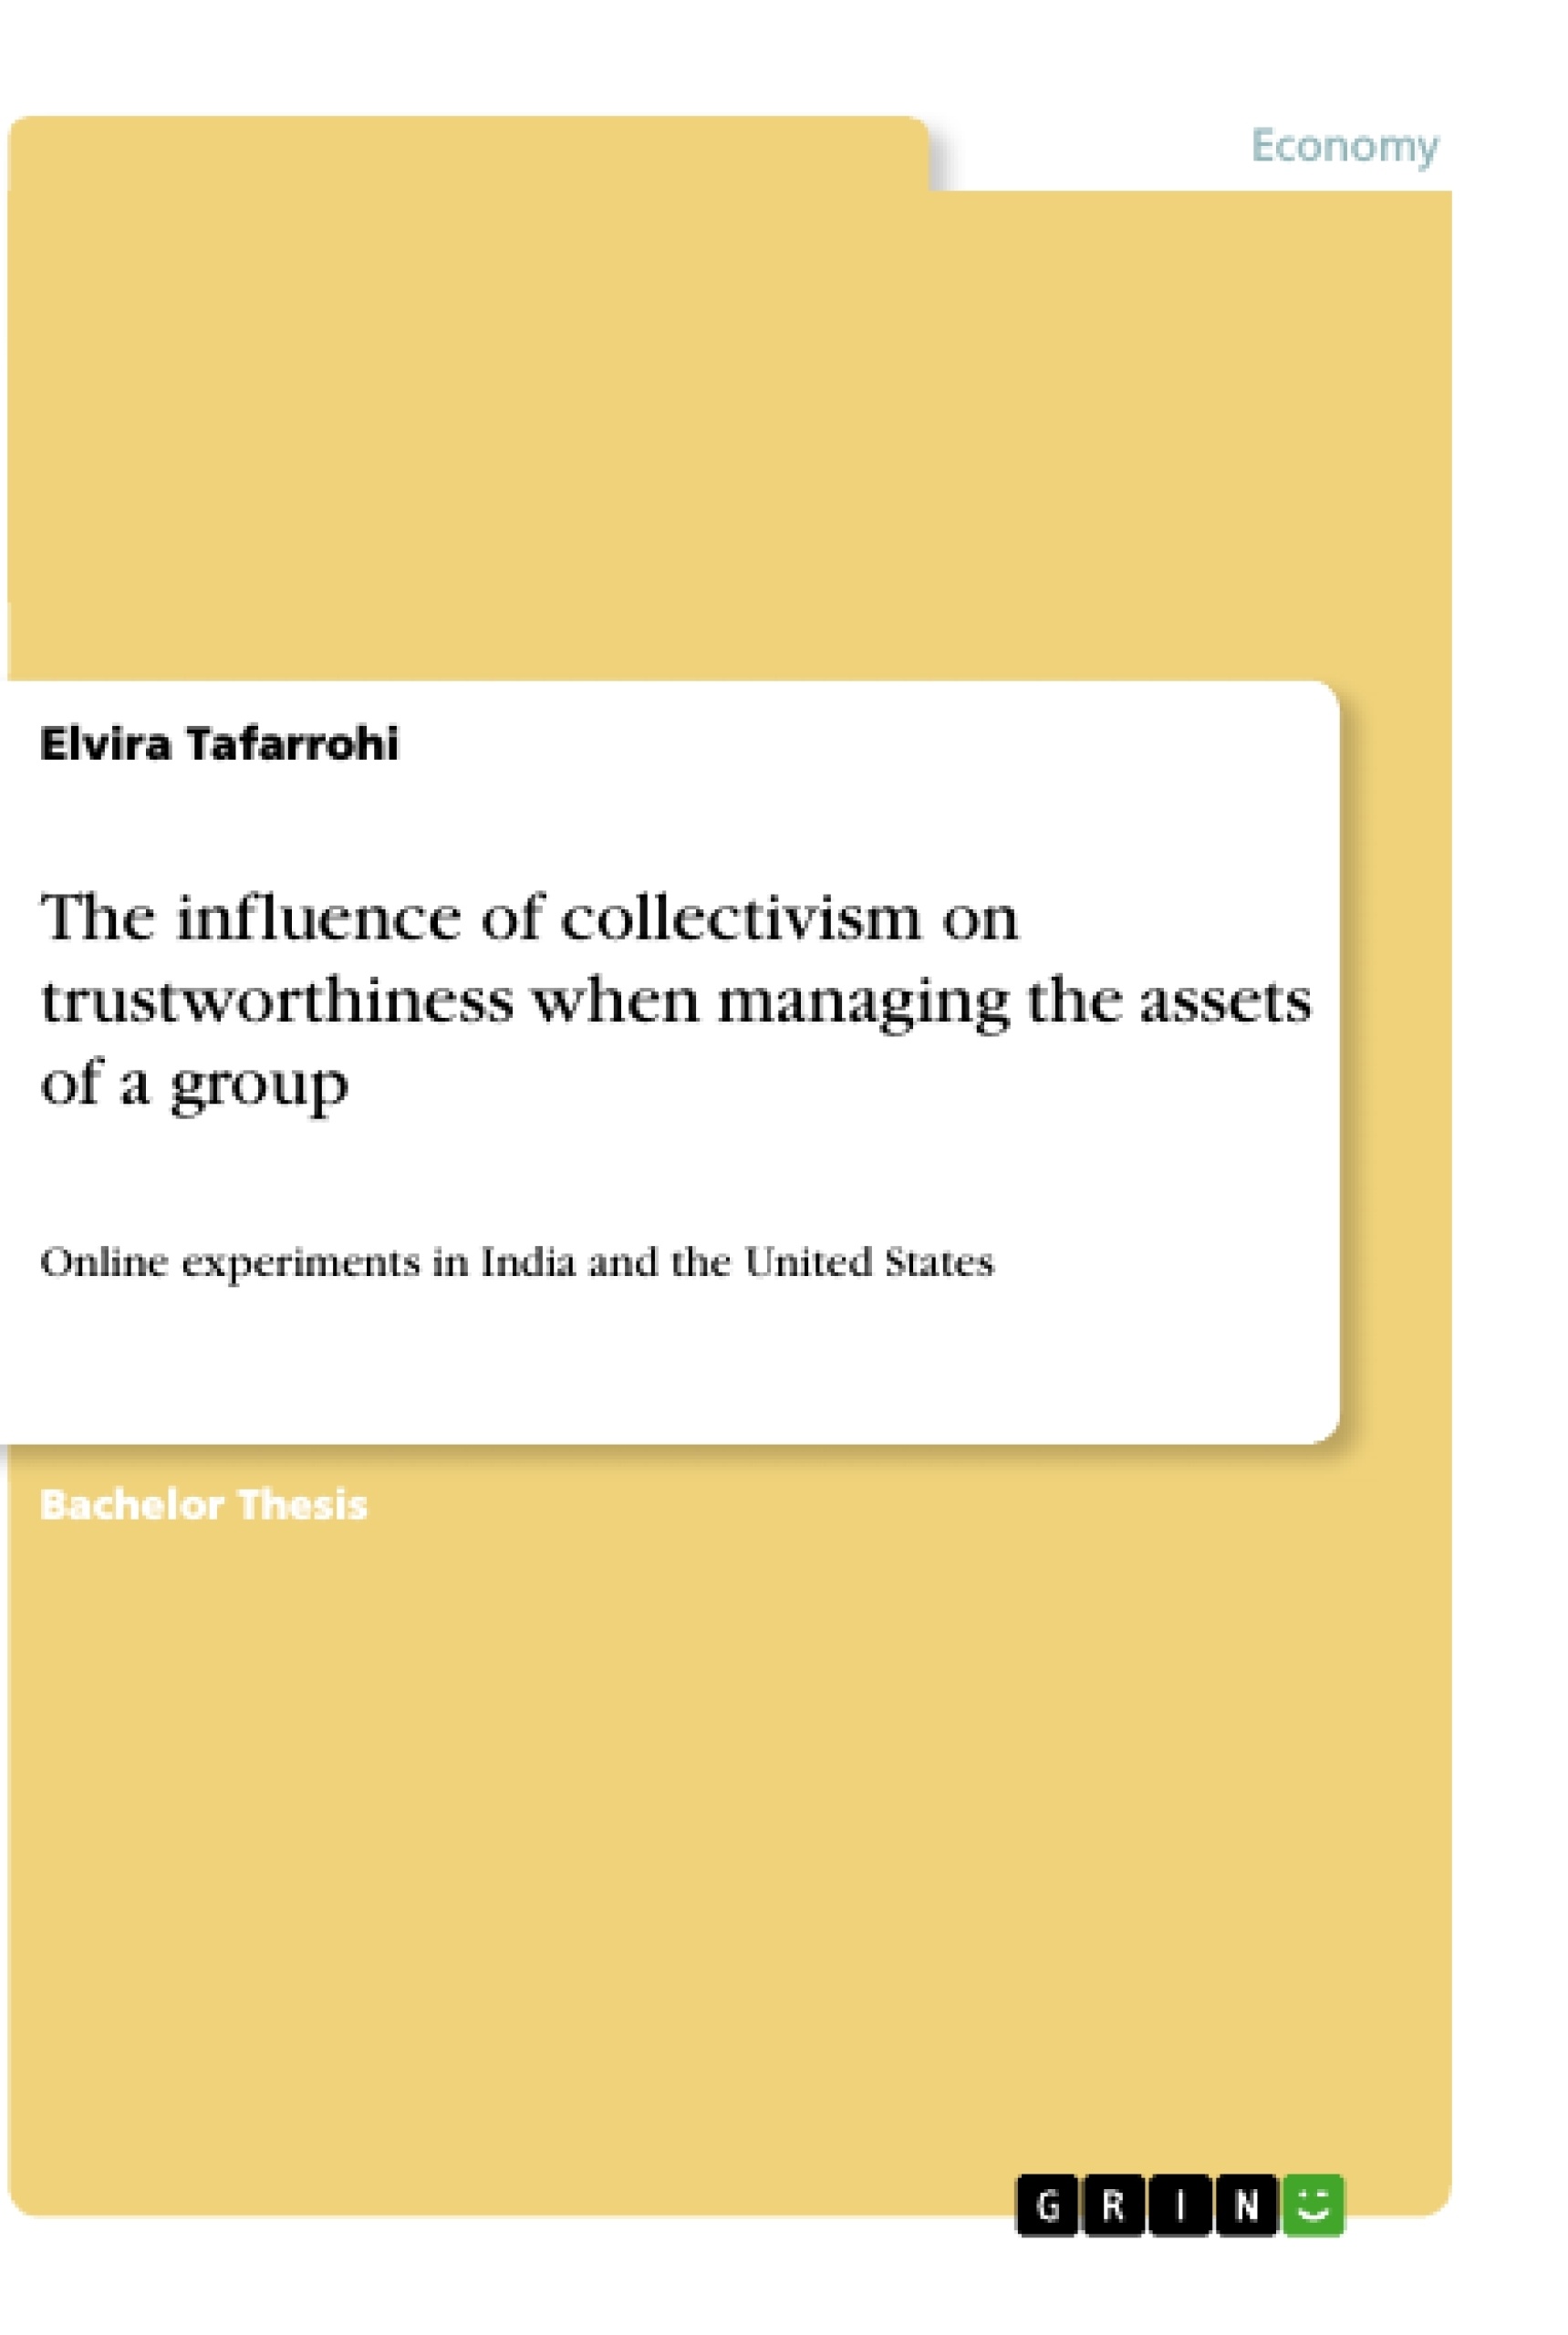 Title: The influence of collectivism on trustworthiness when managing the assets of a group